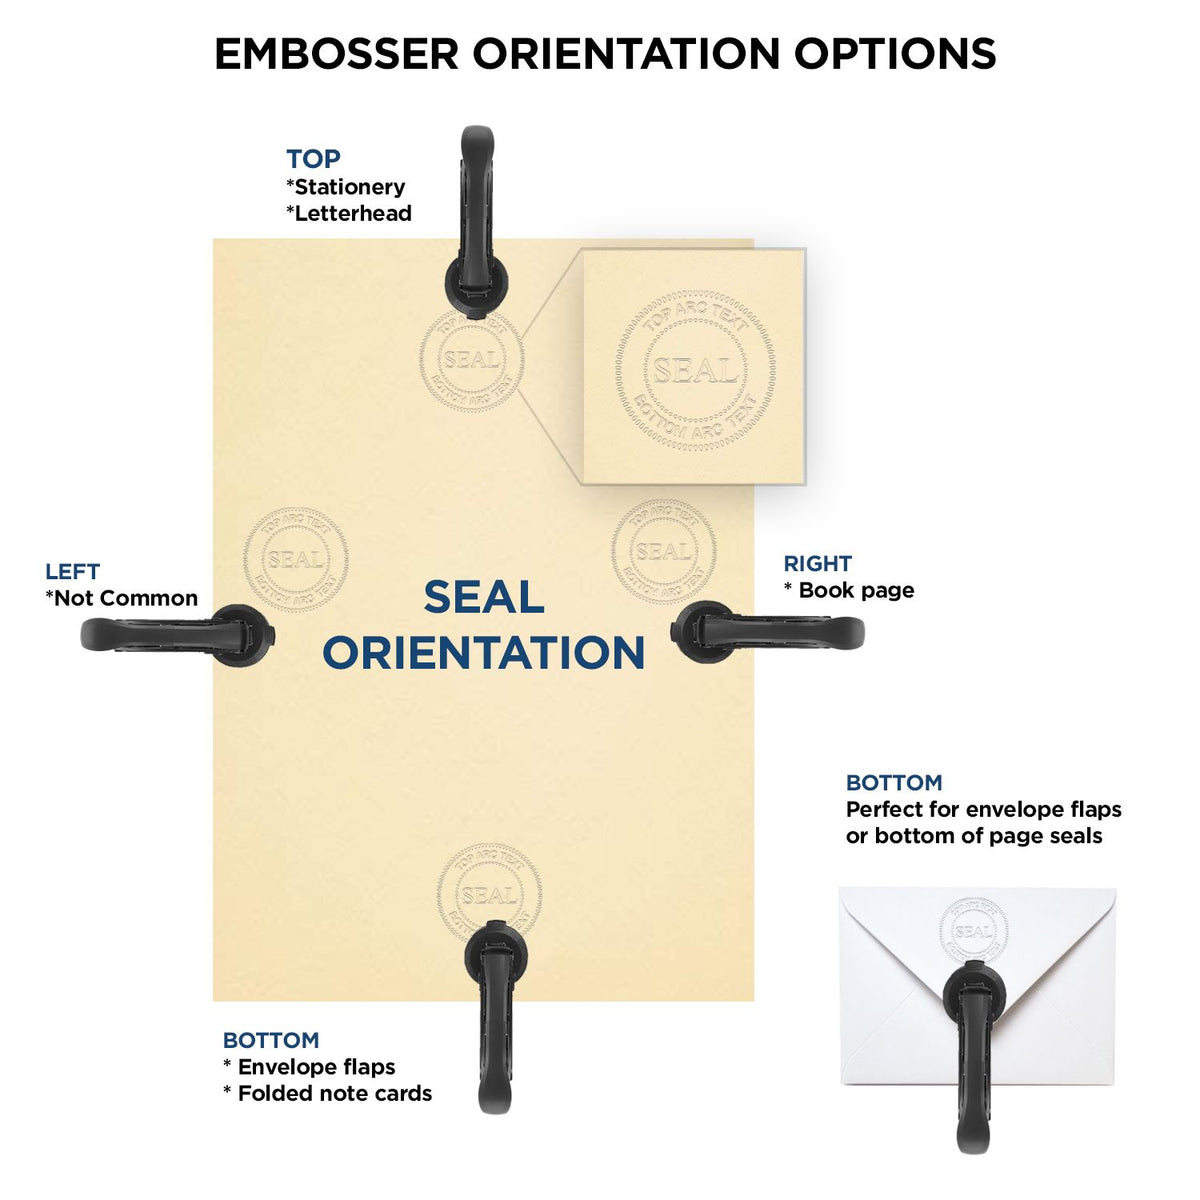 An infographic for the Handheld California Professional Engineer Embosser showing embosser orientation, this is showing examples of a top, bottom, right and left insert.